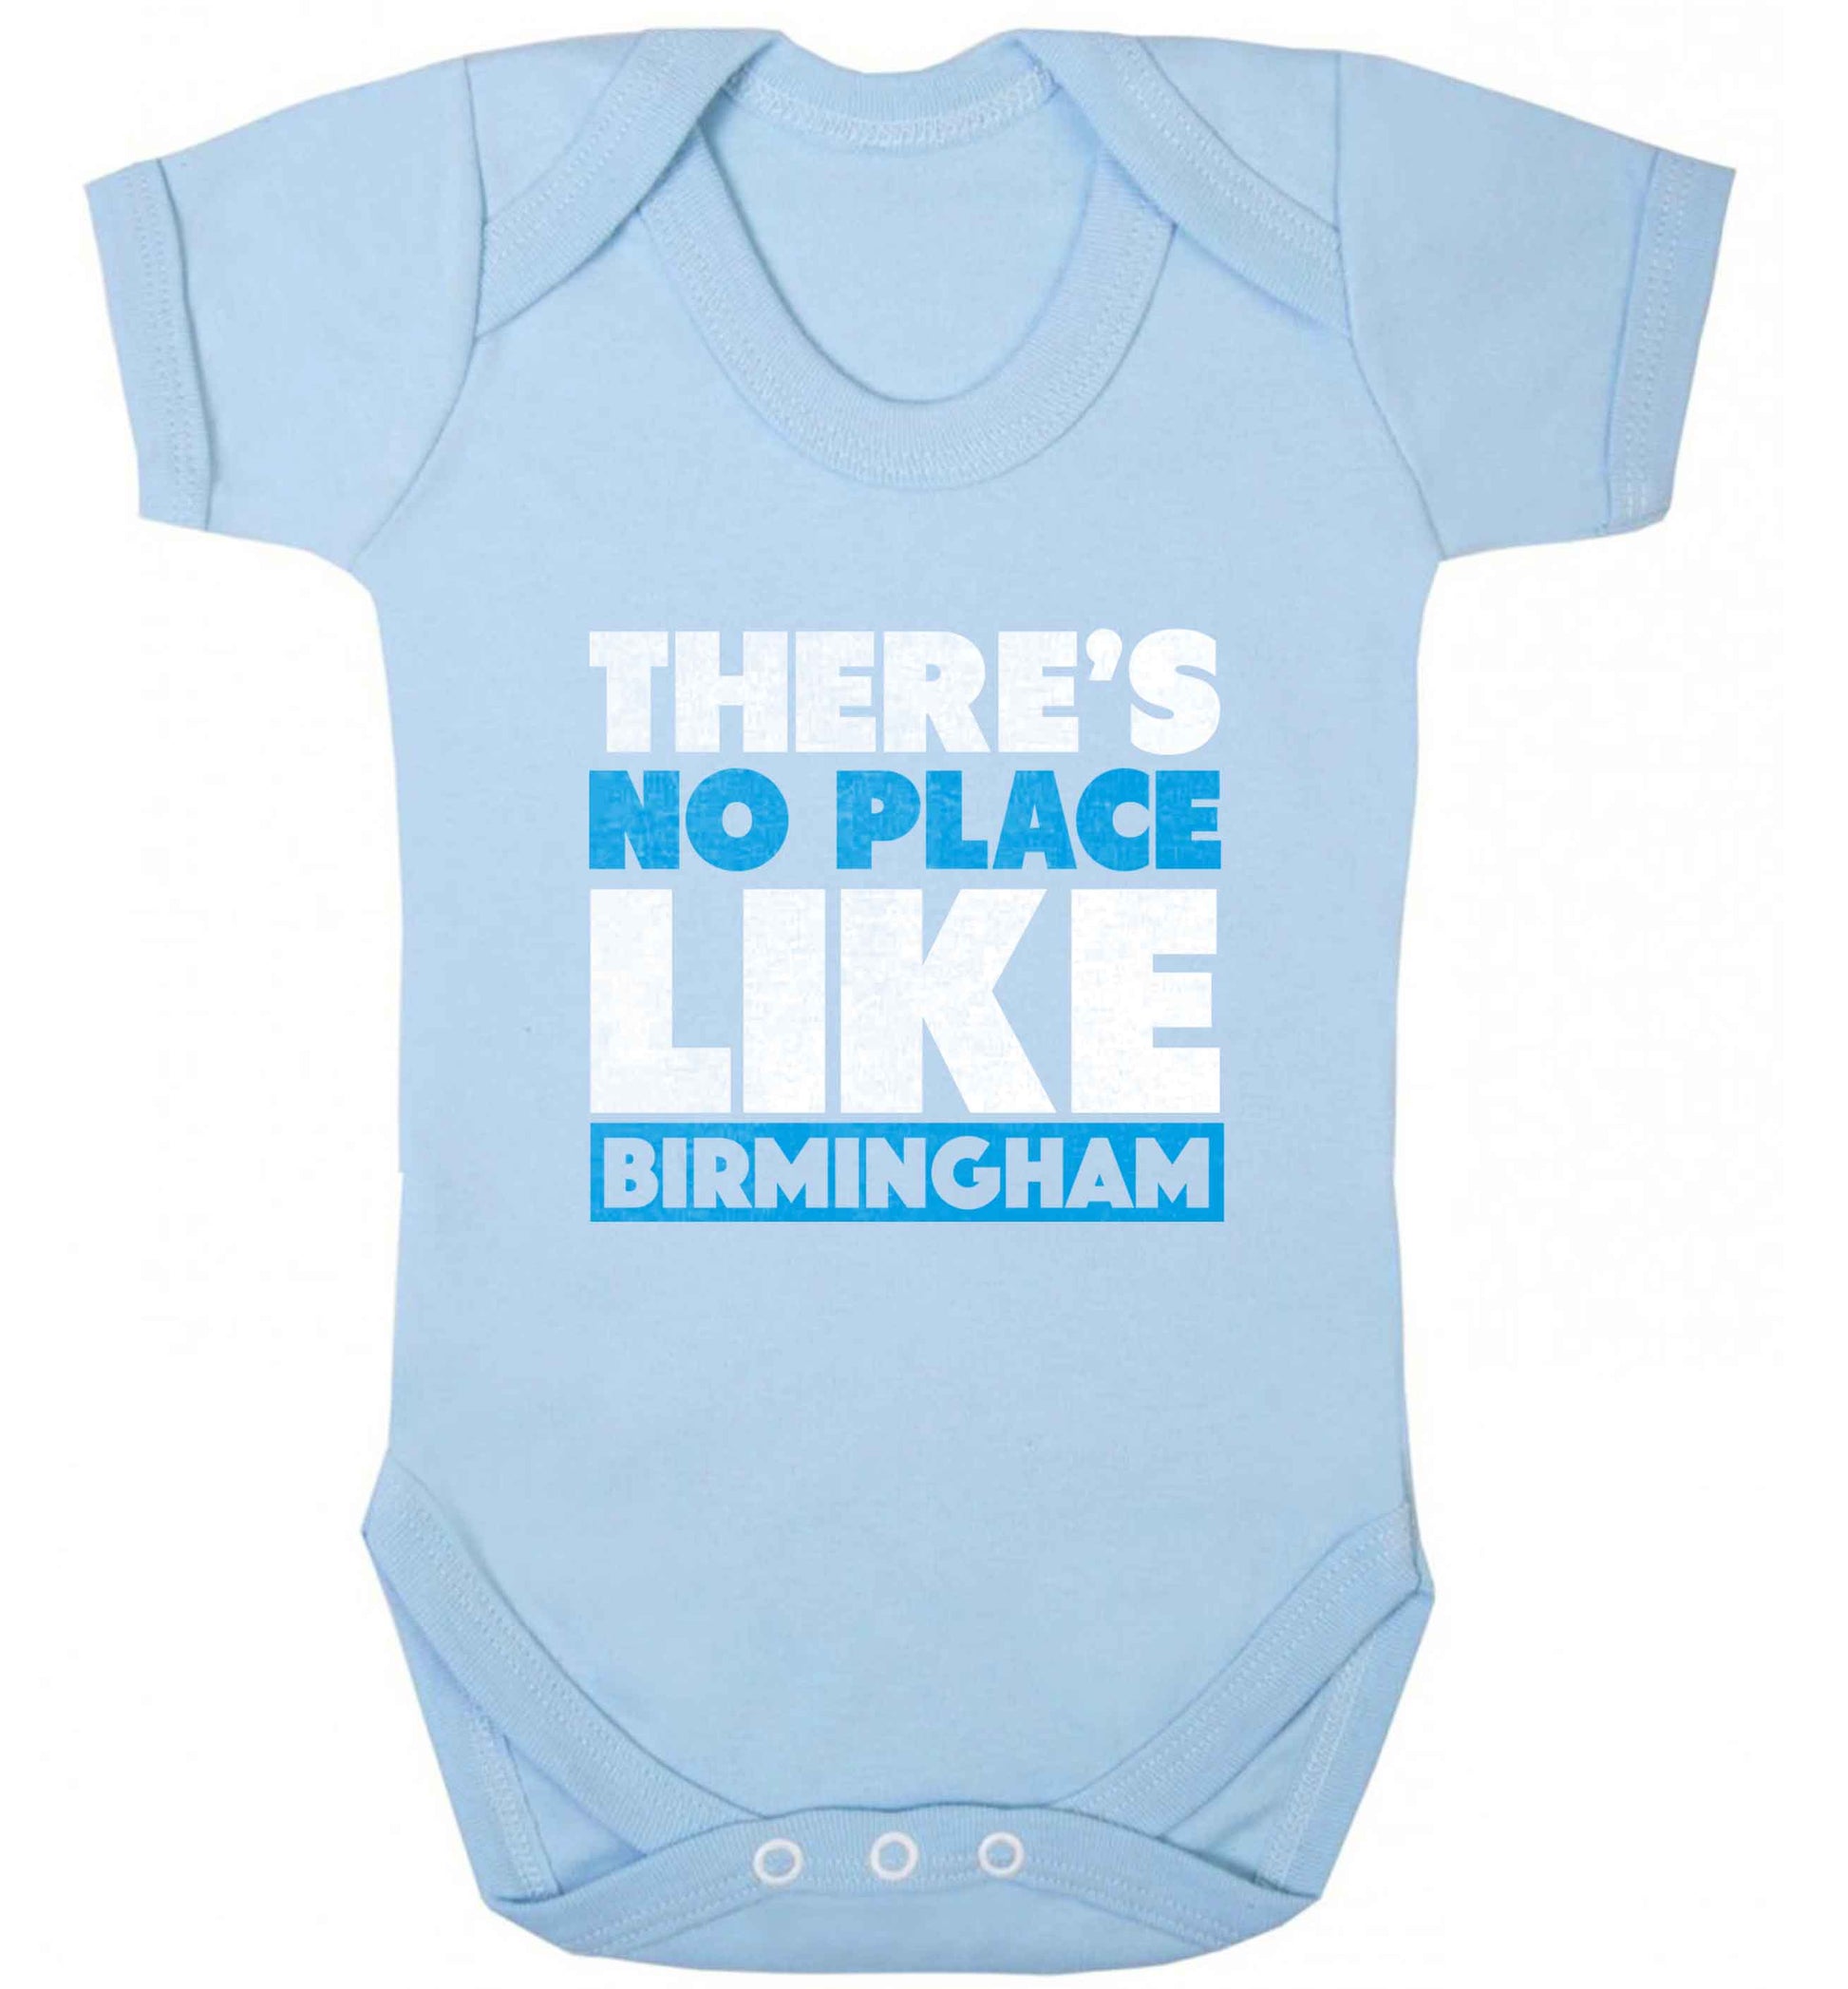 There's no place like Birmingham baby vest pale blue 18-24 months